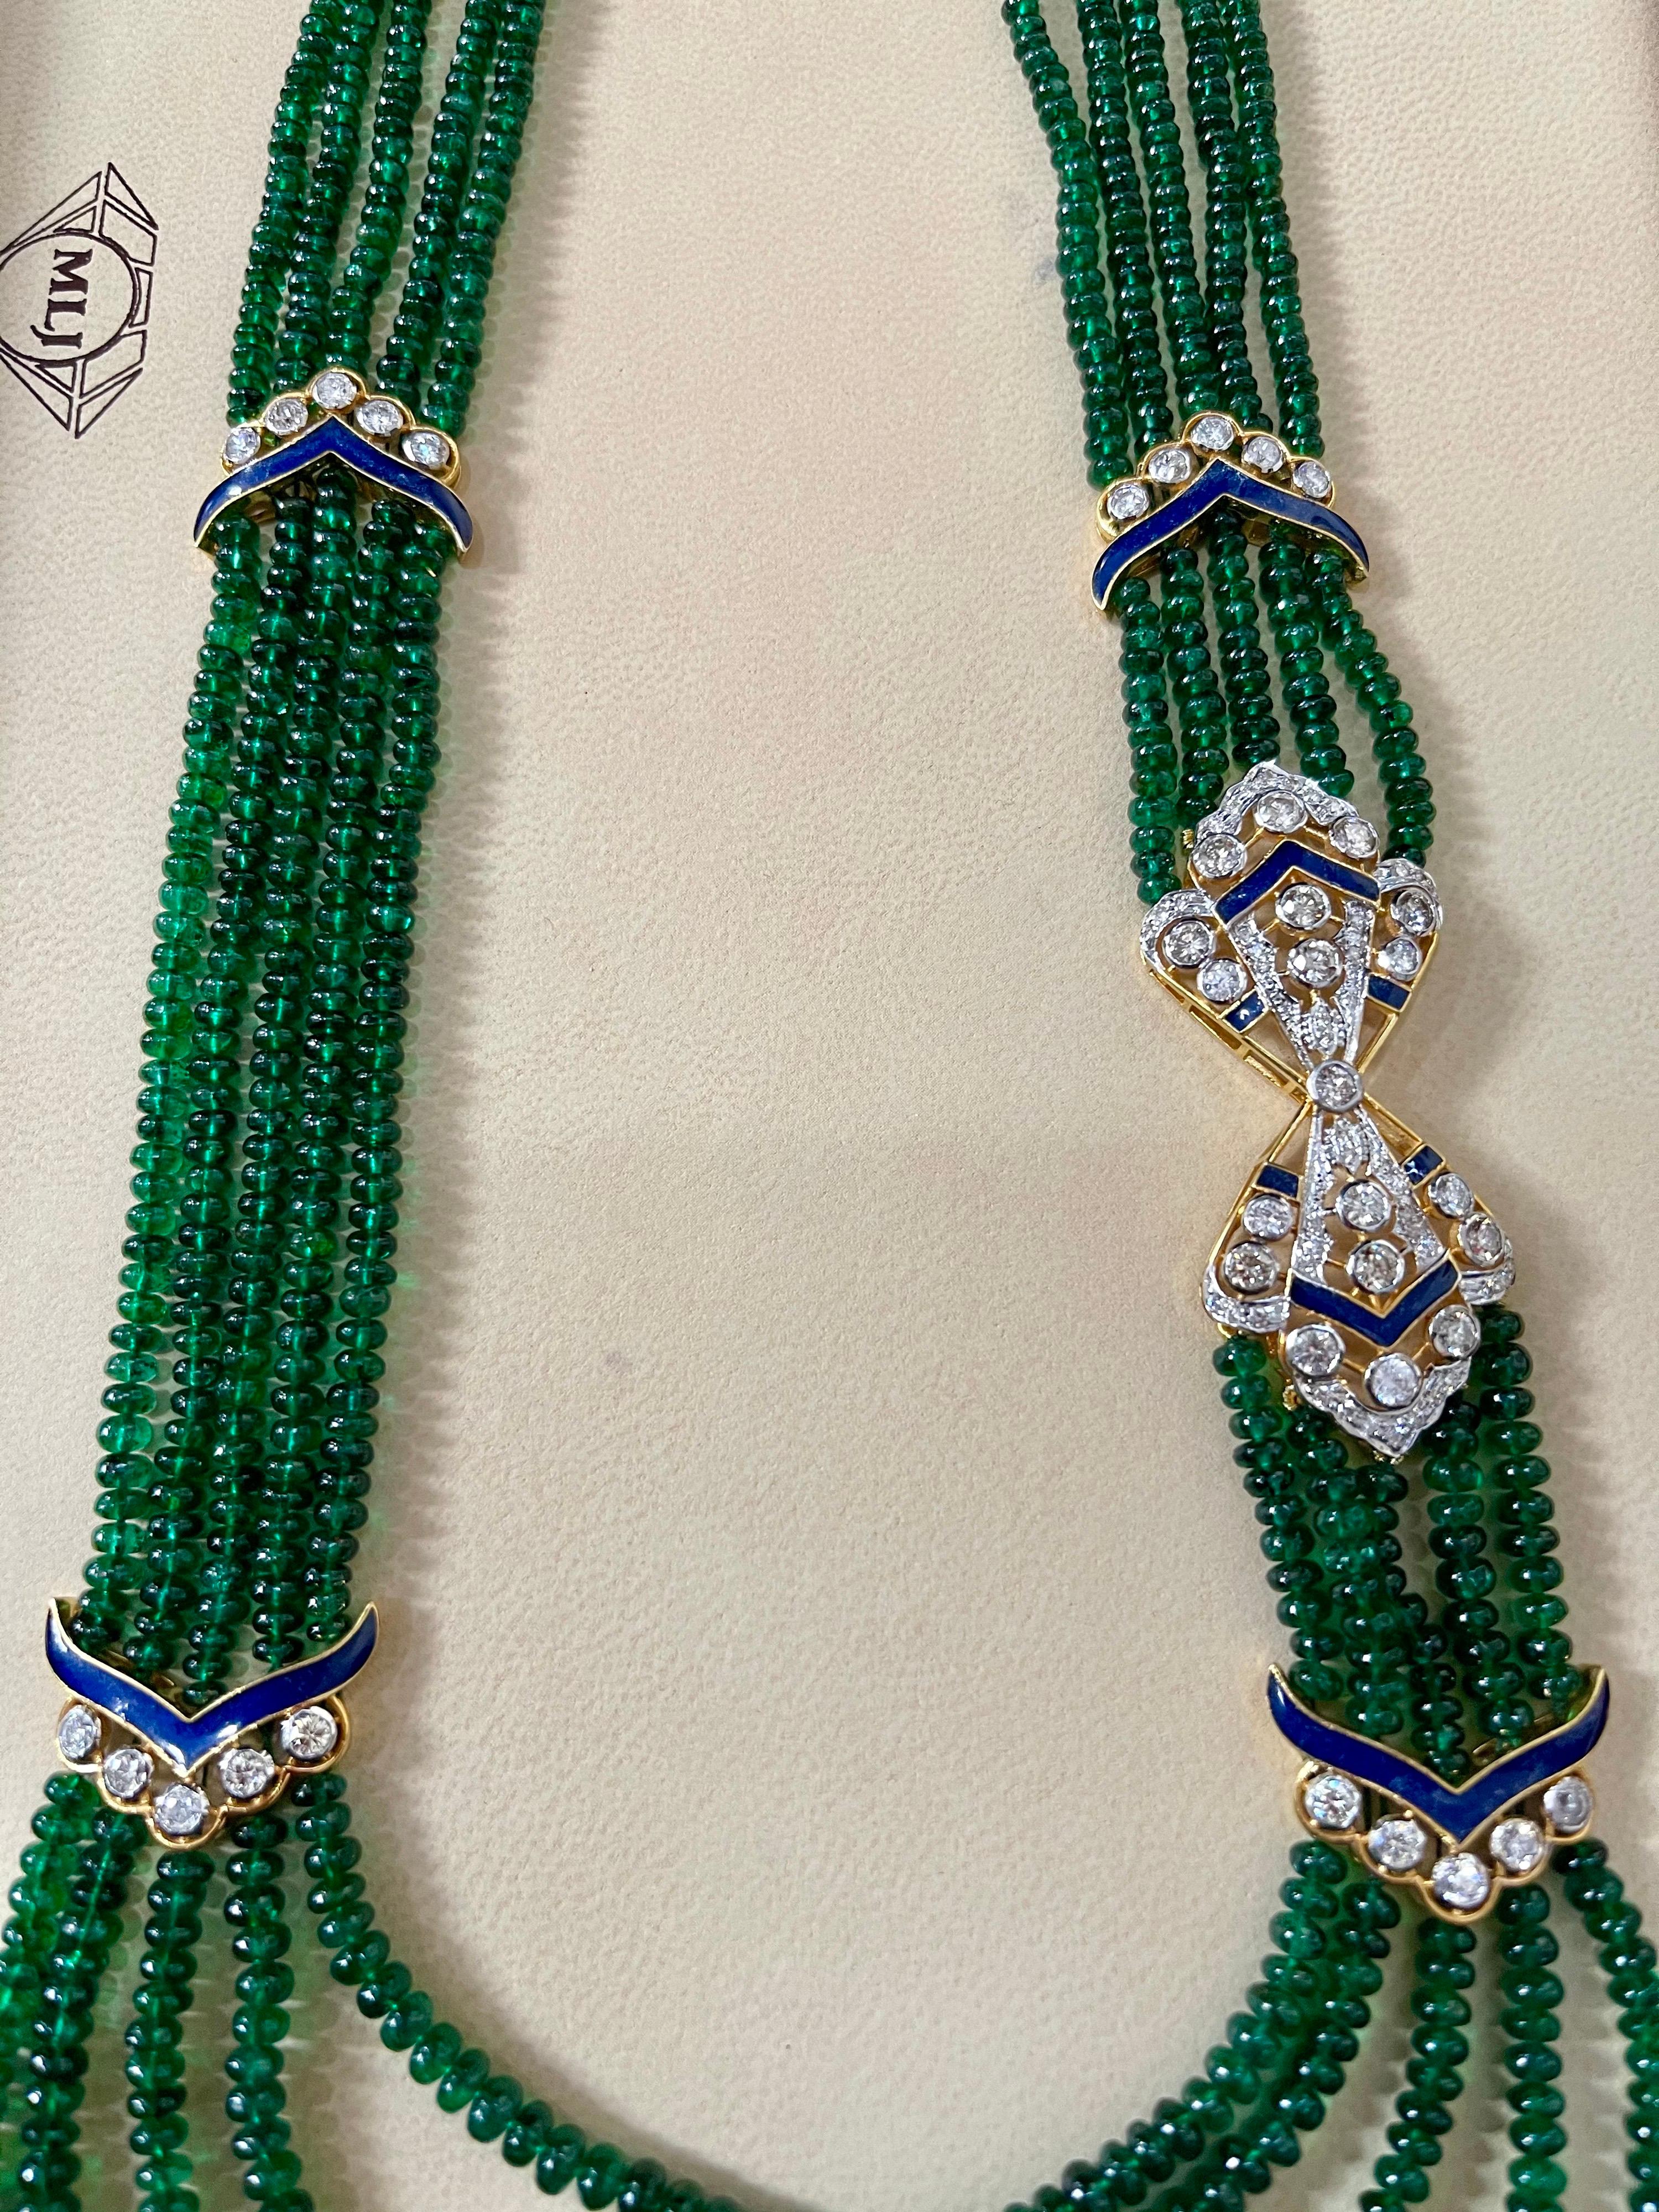 Women's 300 Carat 5-Strand Emerald Necklace with 4.8 Carat Diamond & Enamel in 14k Gold For Sale